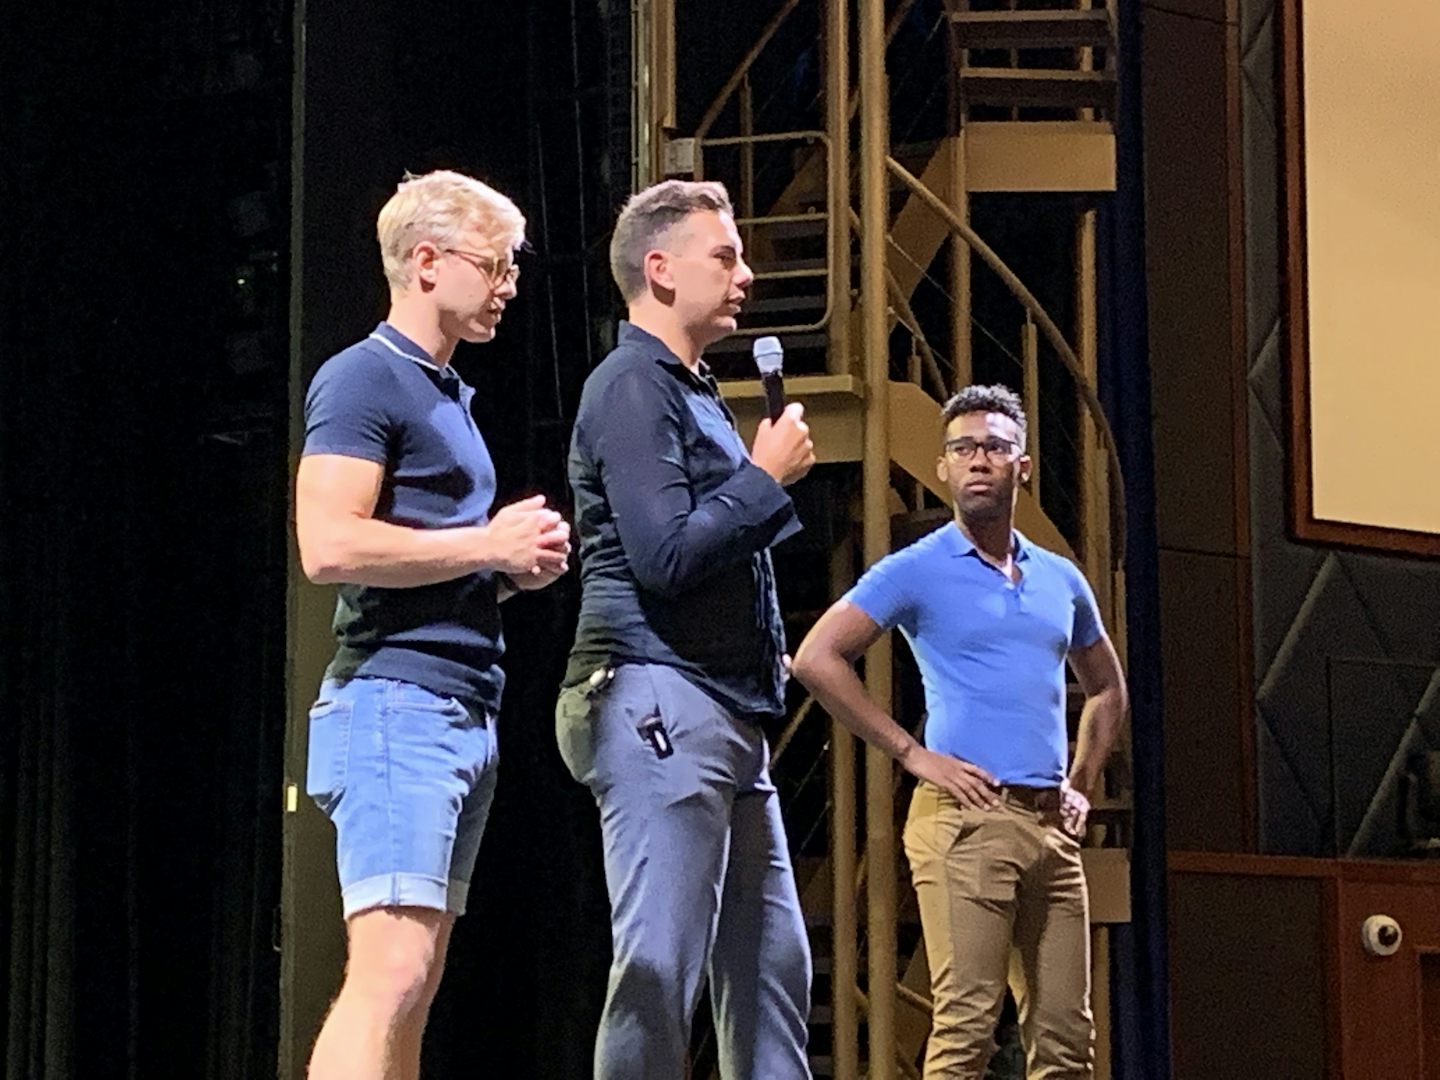 Cast of Hairspray hosting the Behind the Scenes Tour in the theater 